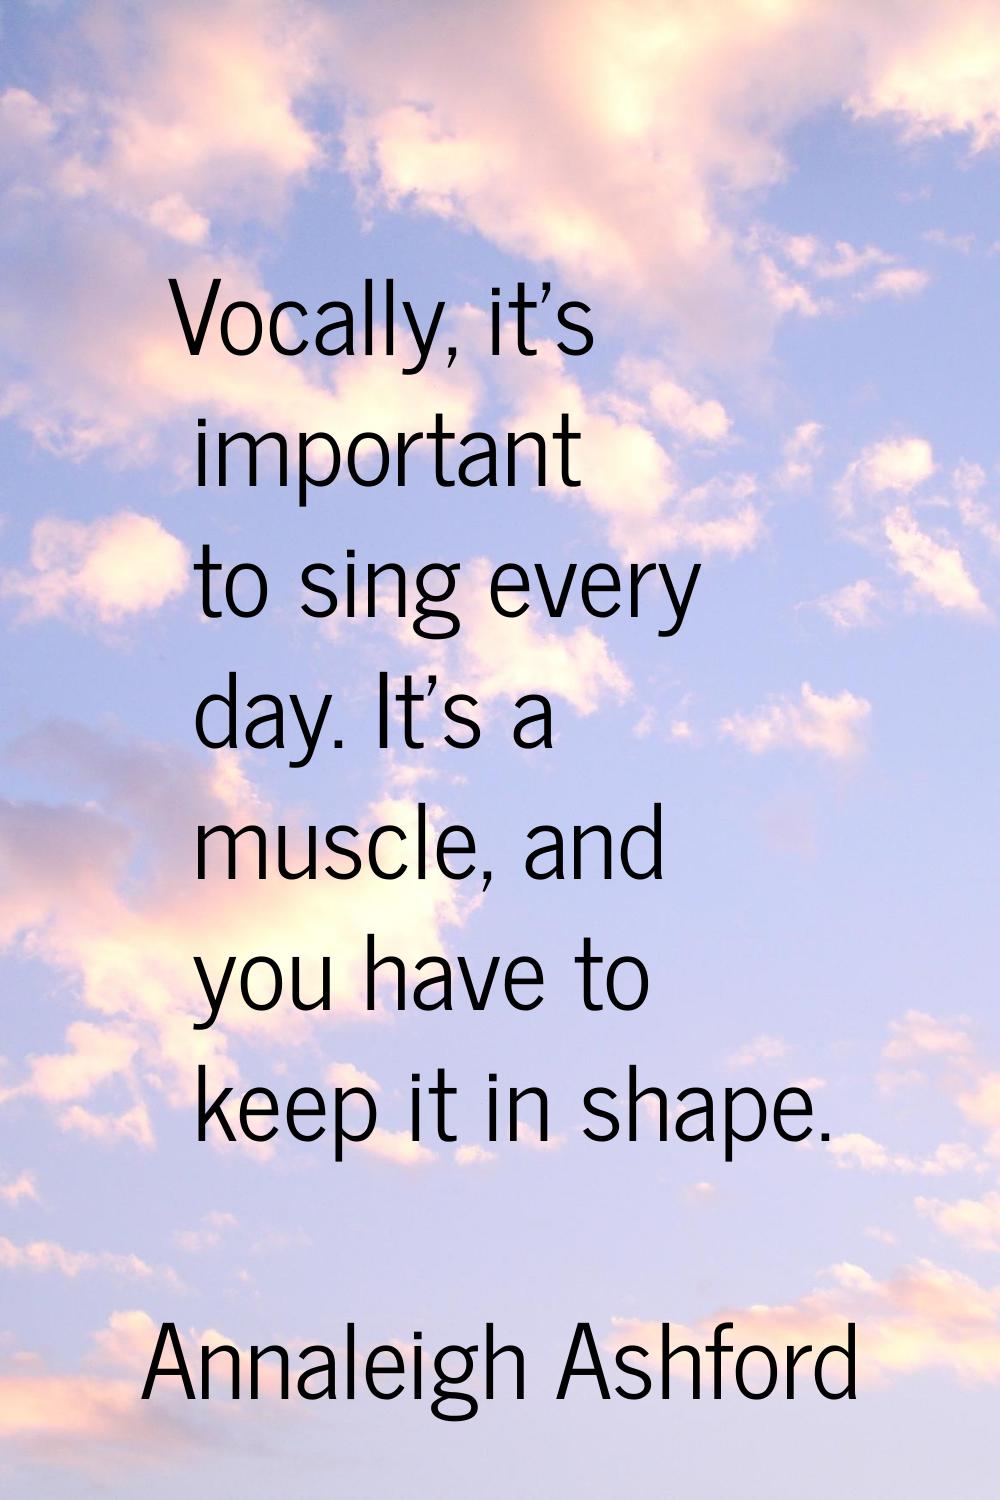 Vocally, it's important to sing every day. It's a muscle, and you have to keep it in shape.